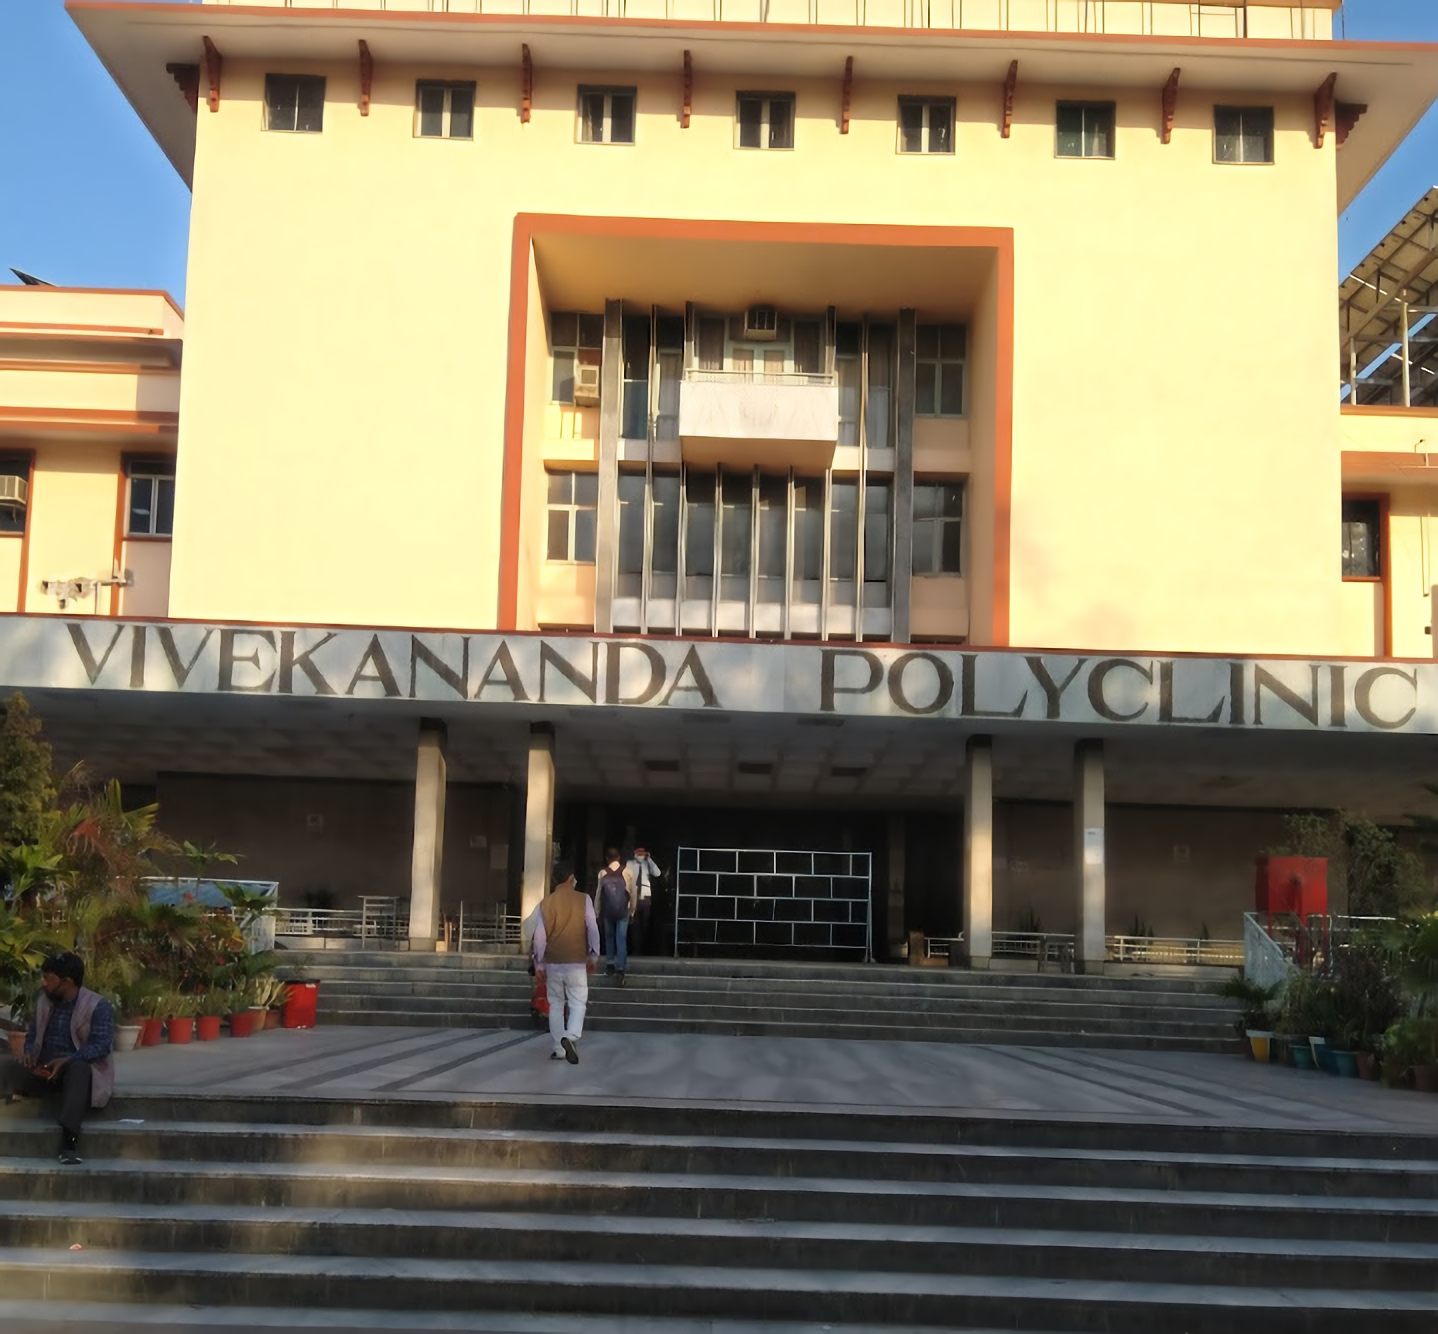 Vivekananda Polyclinic And Institute Of Medical Sciences